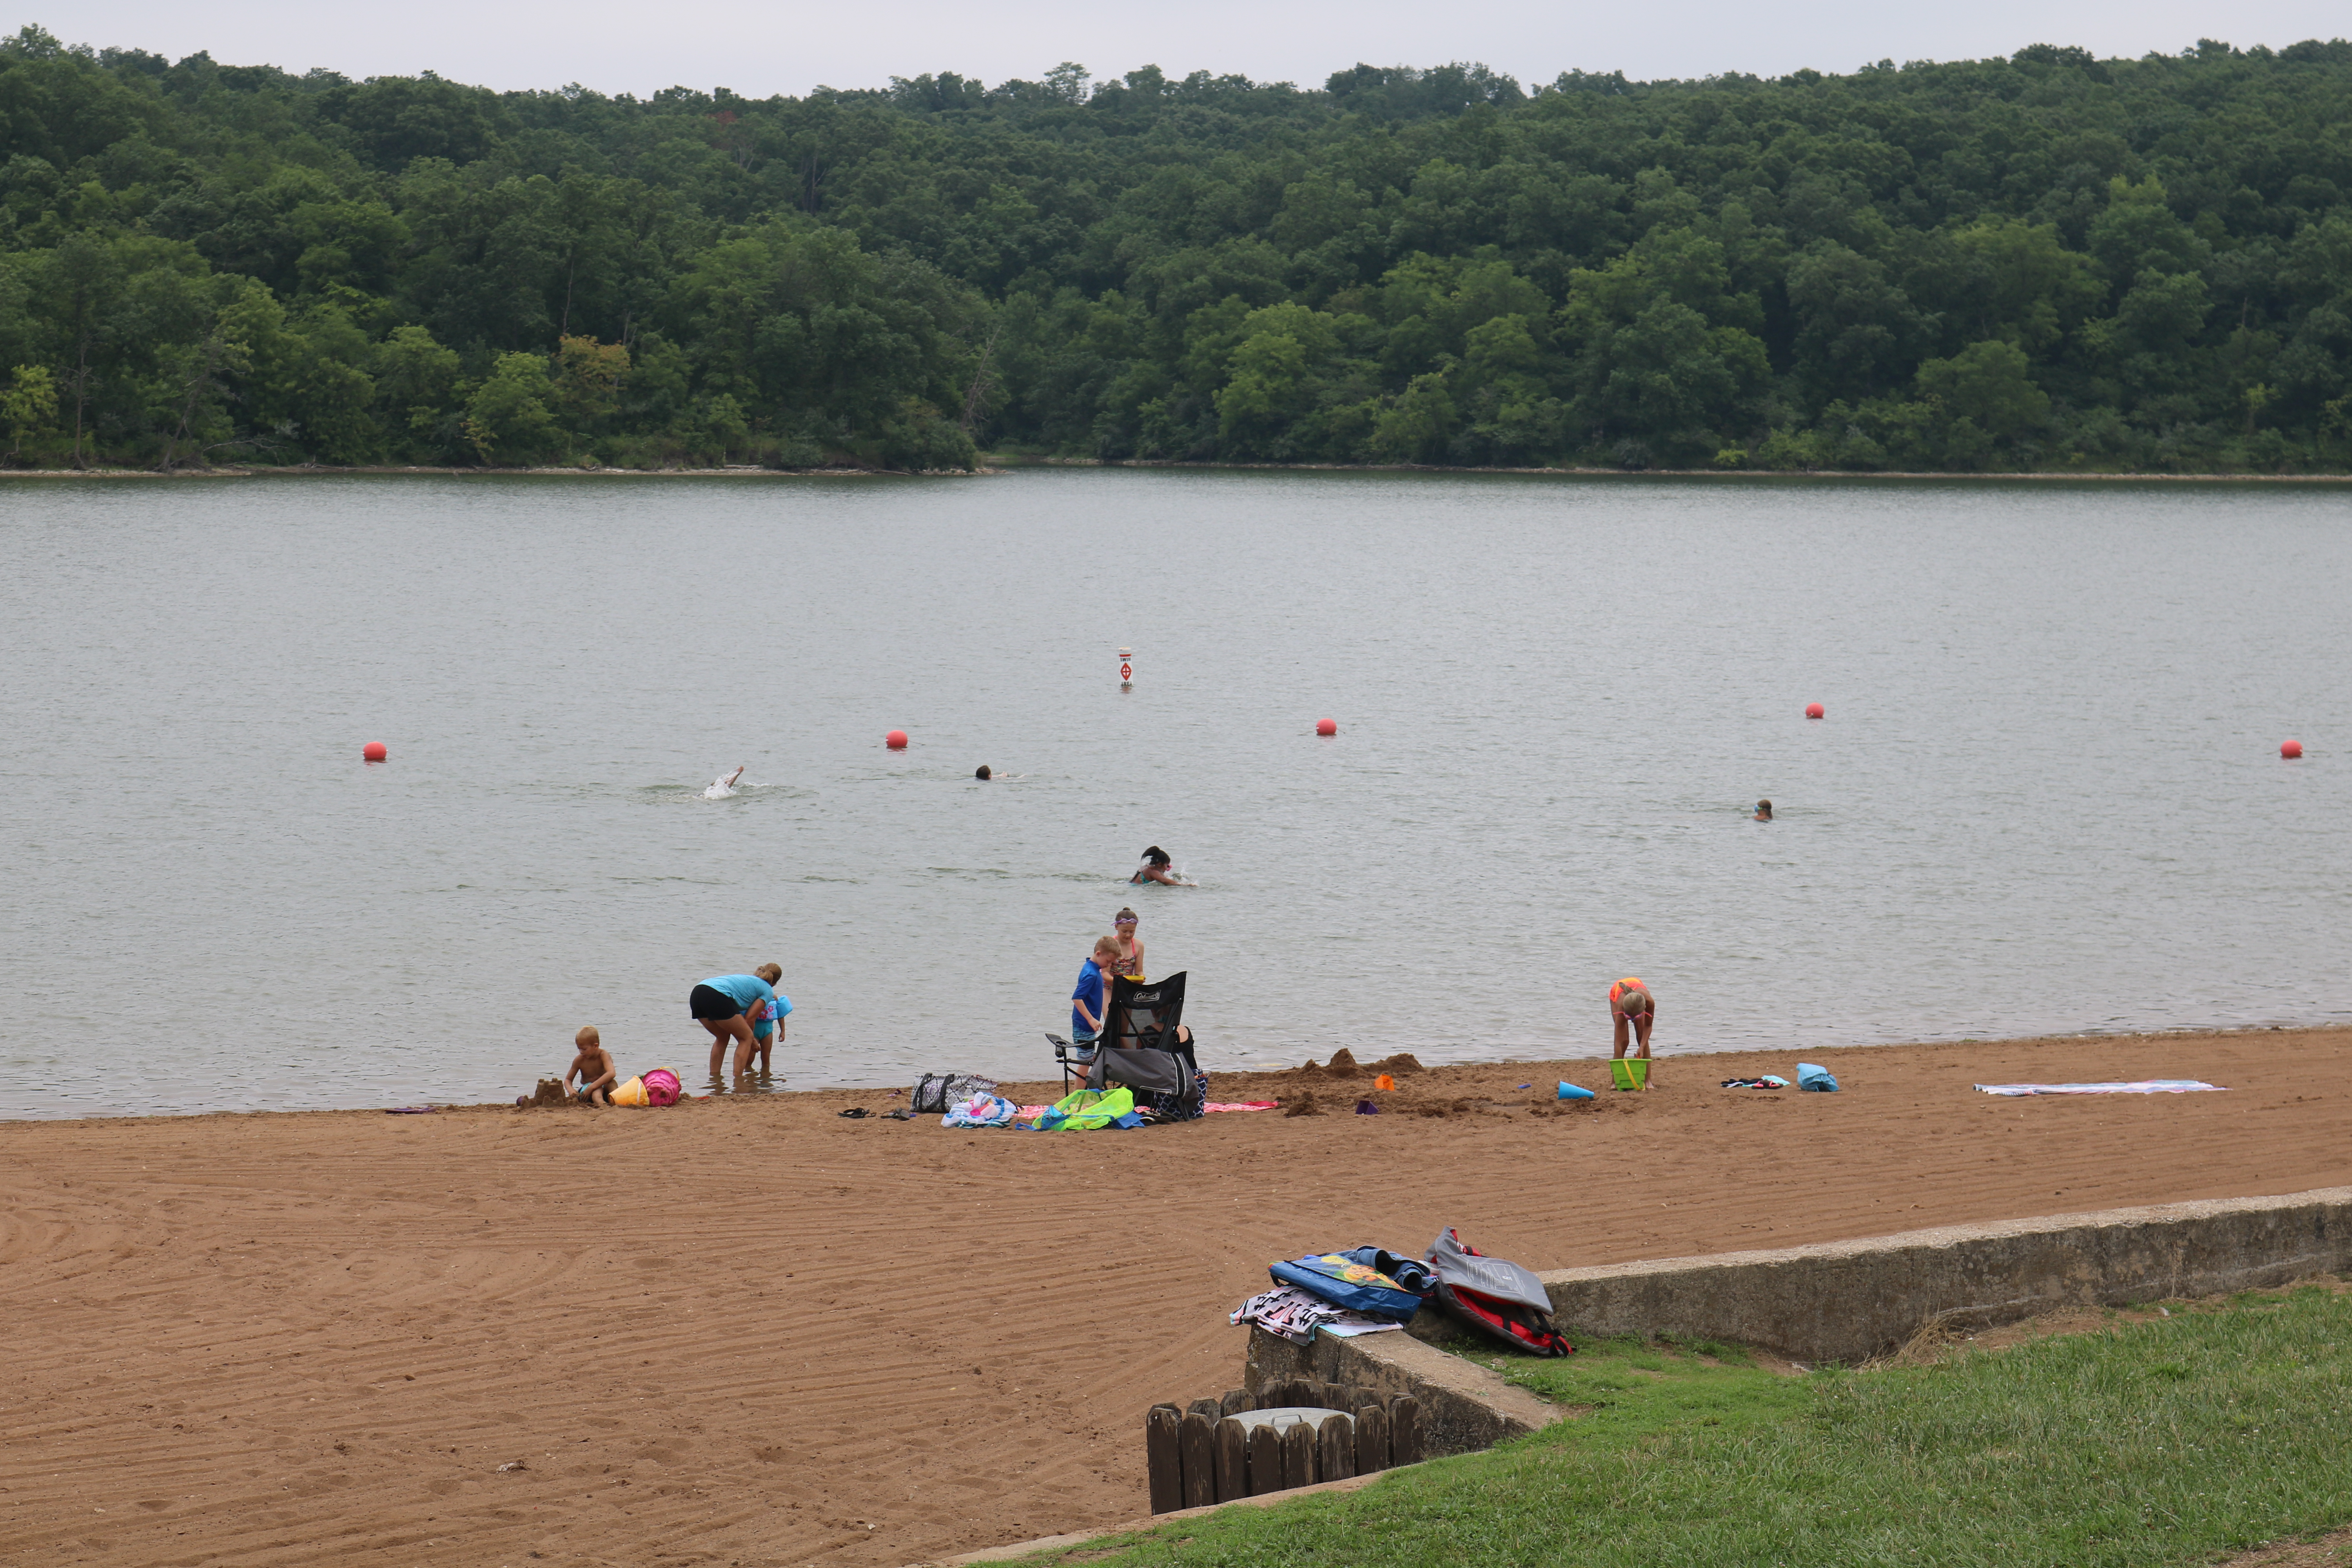 people on the beach and swimming in the lake